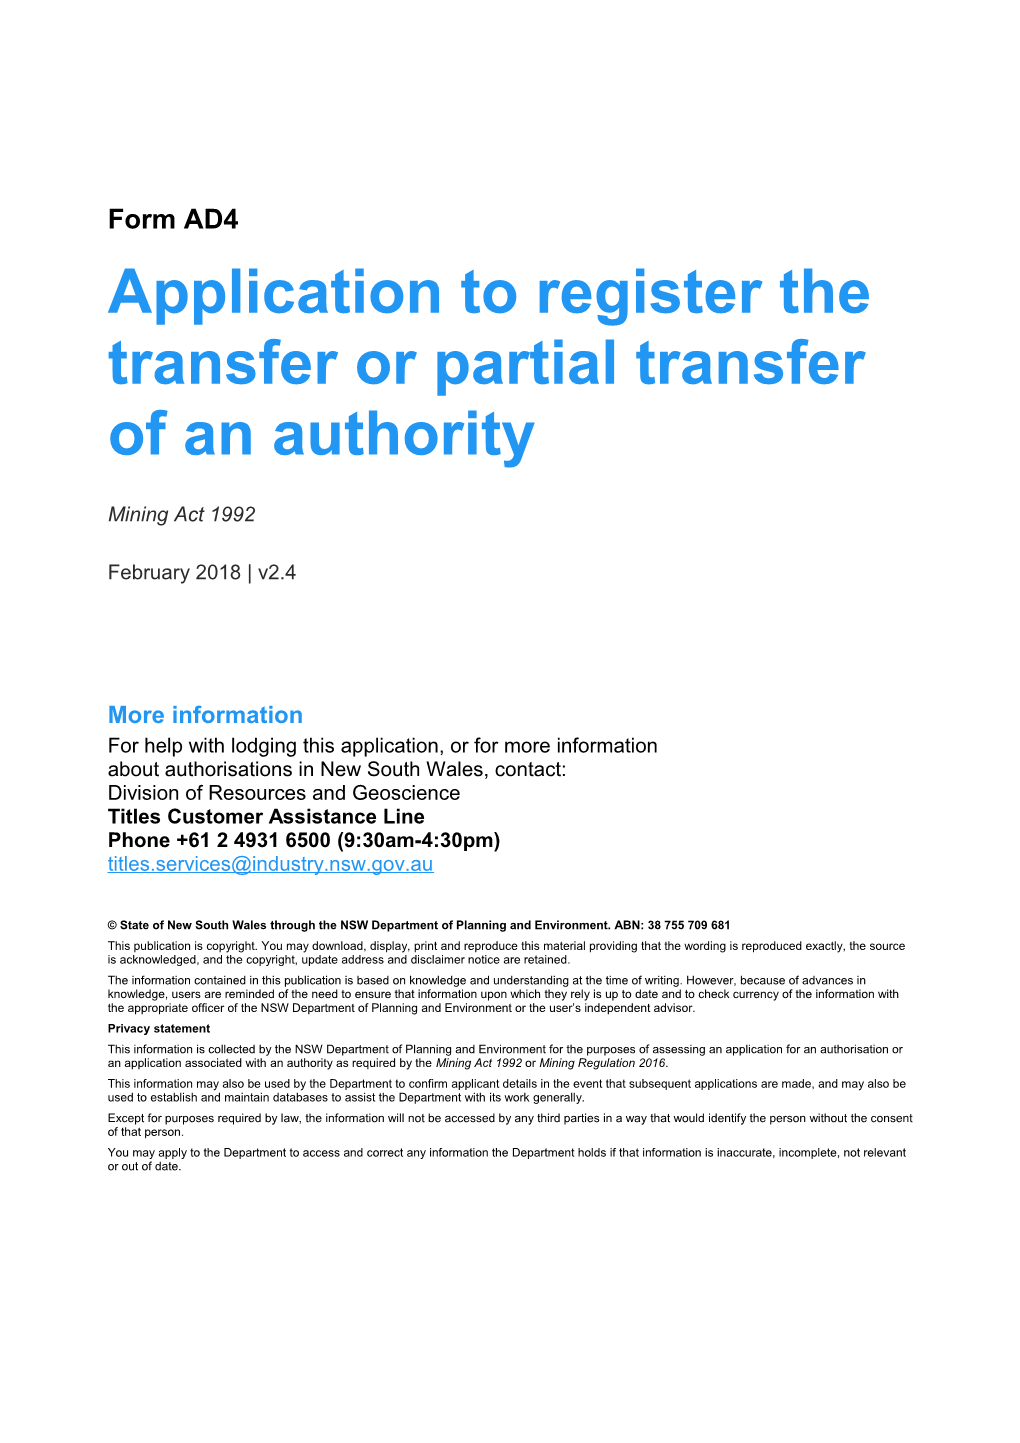 AD4 Application to Register a Transfer Or Partial Transfer of an Authority